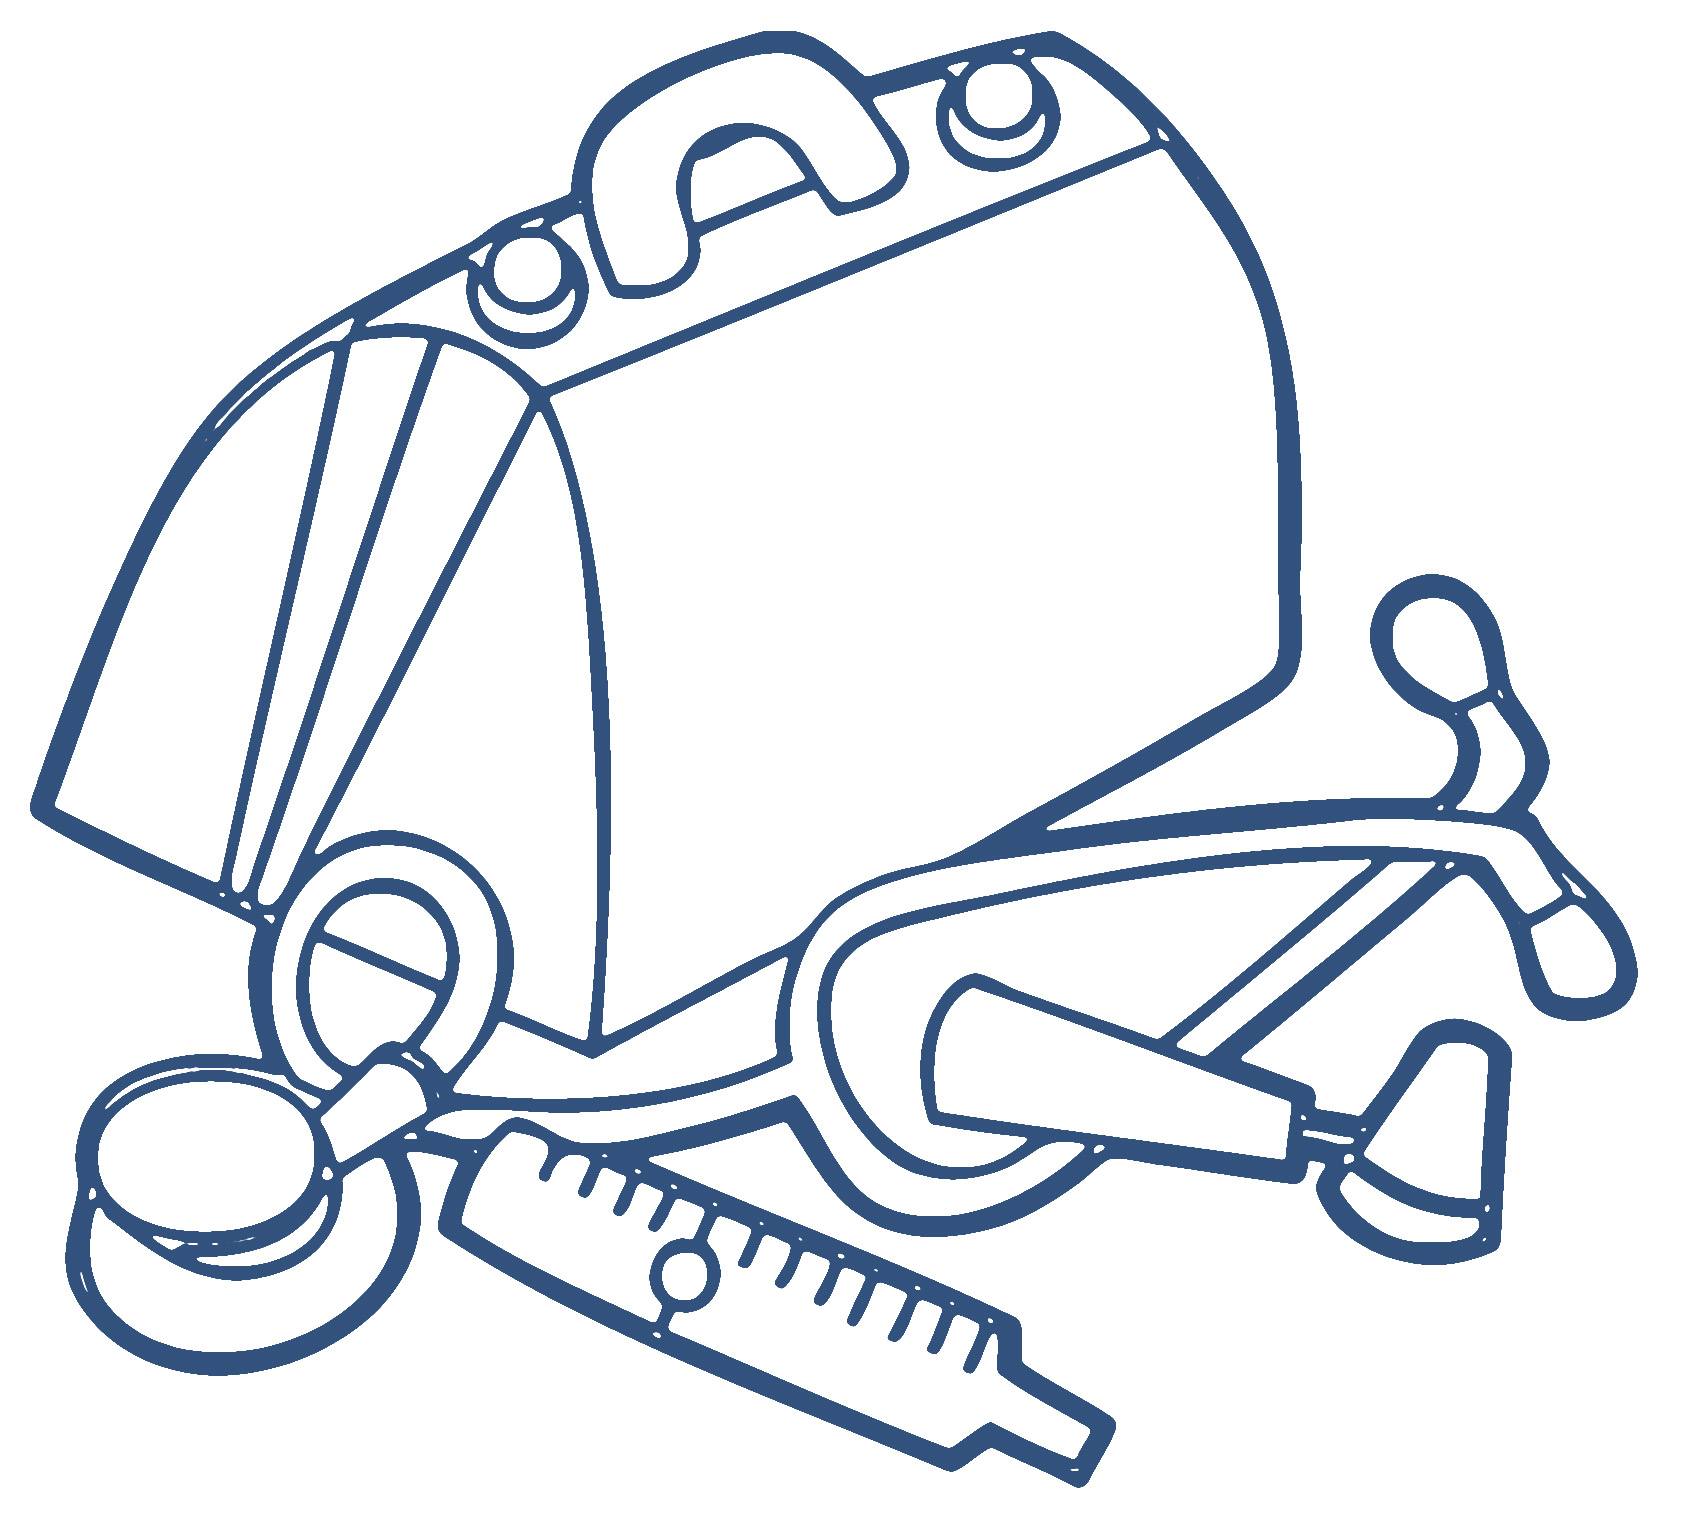 Medical Instruments - ClipArt Best